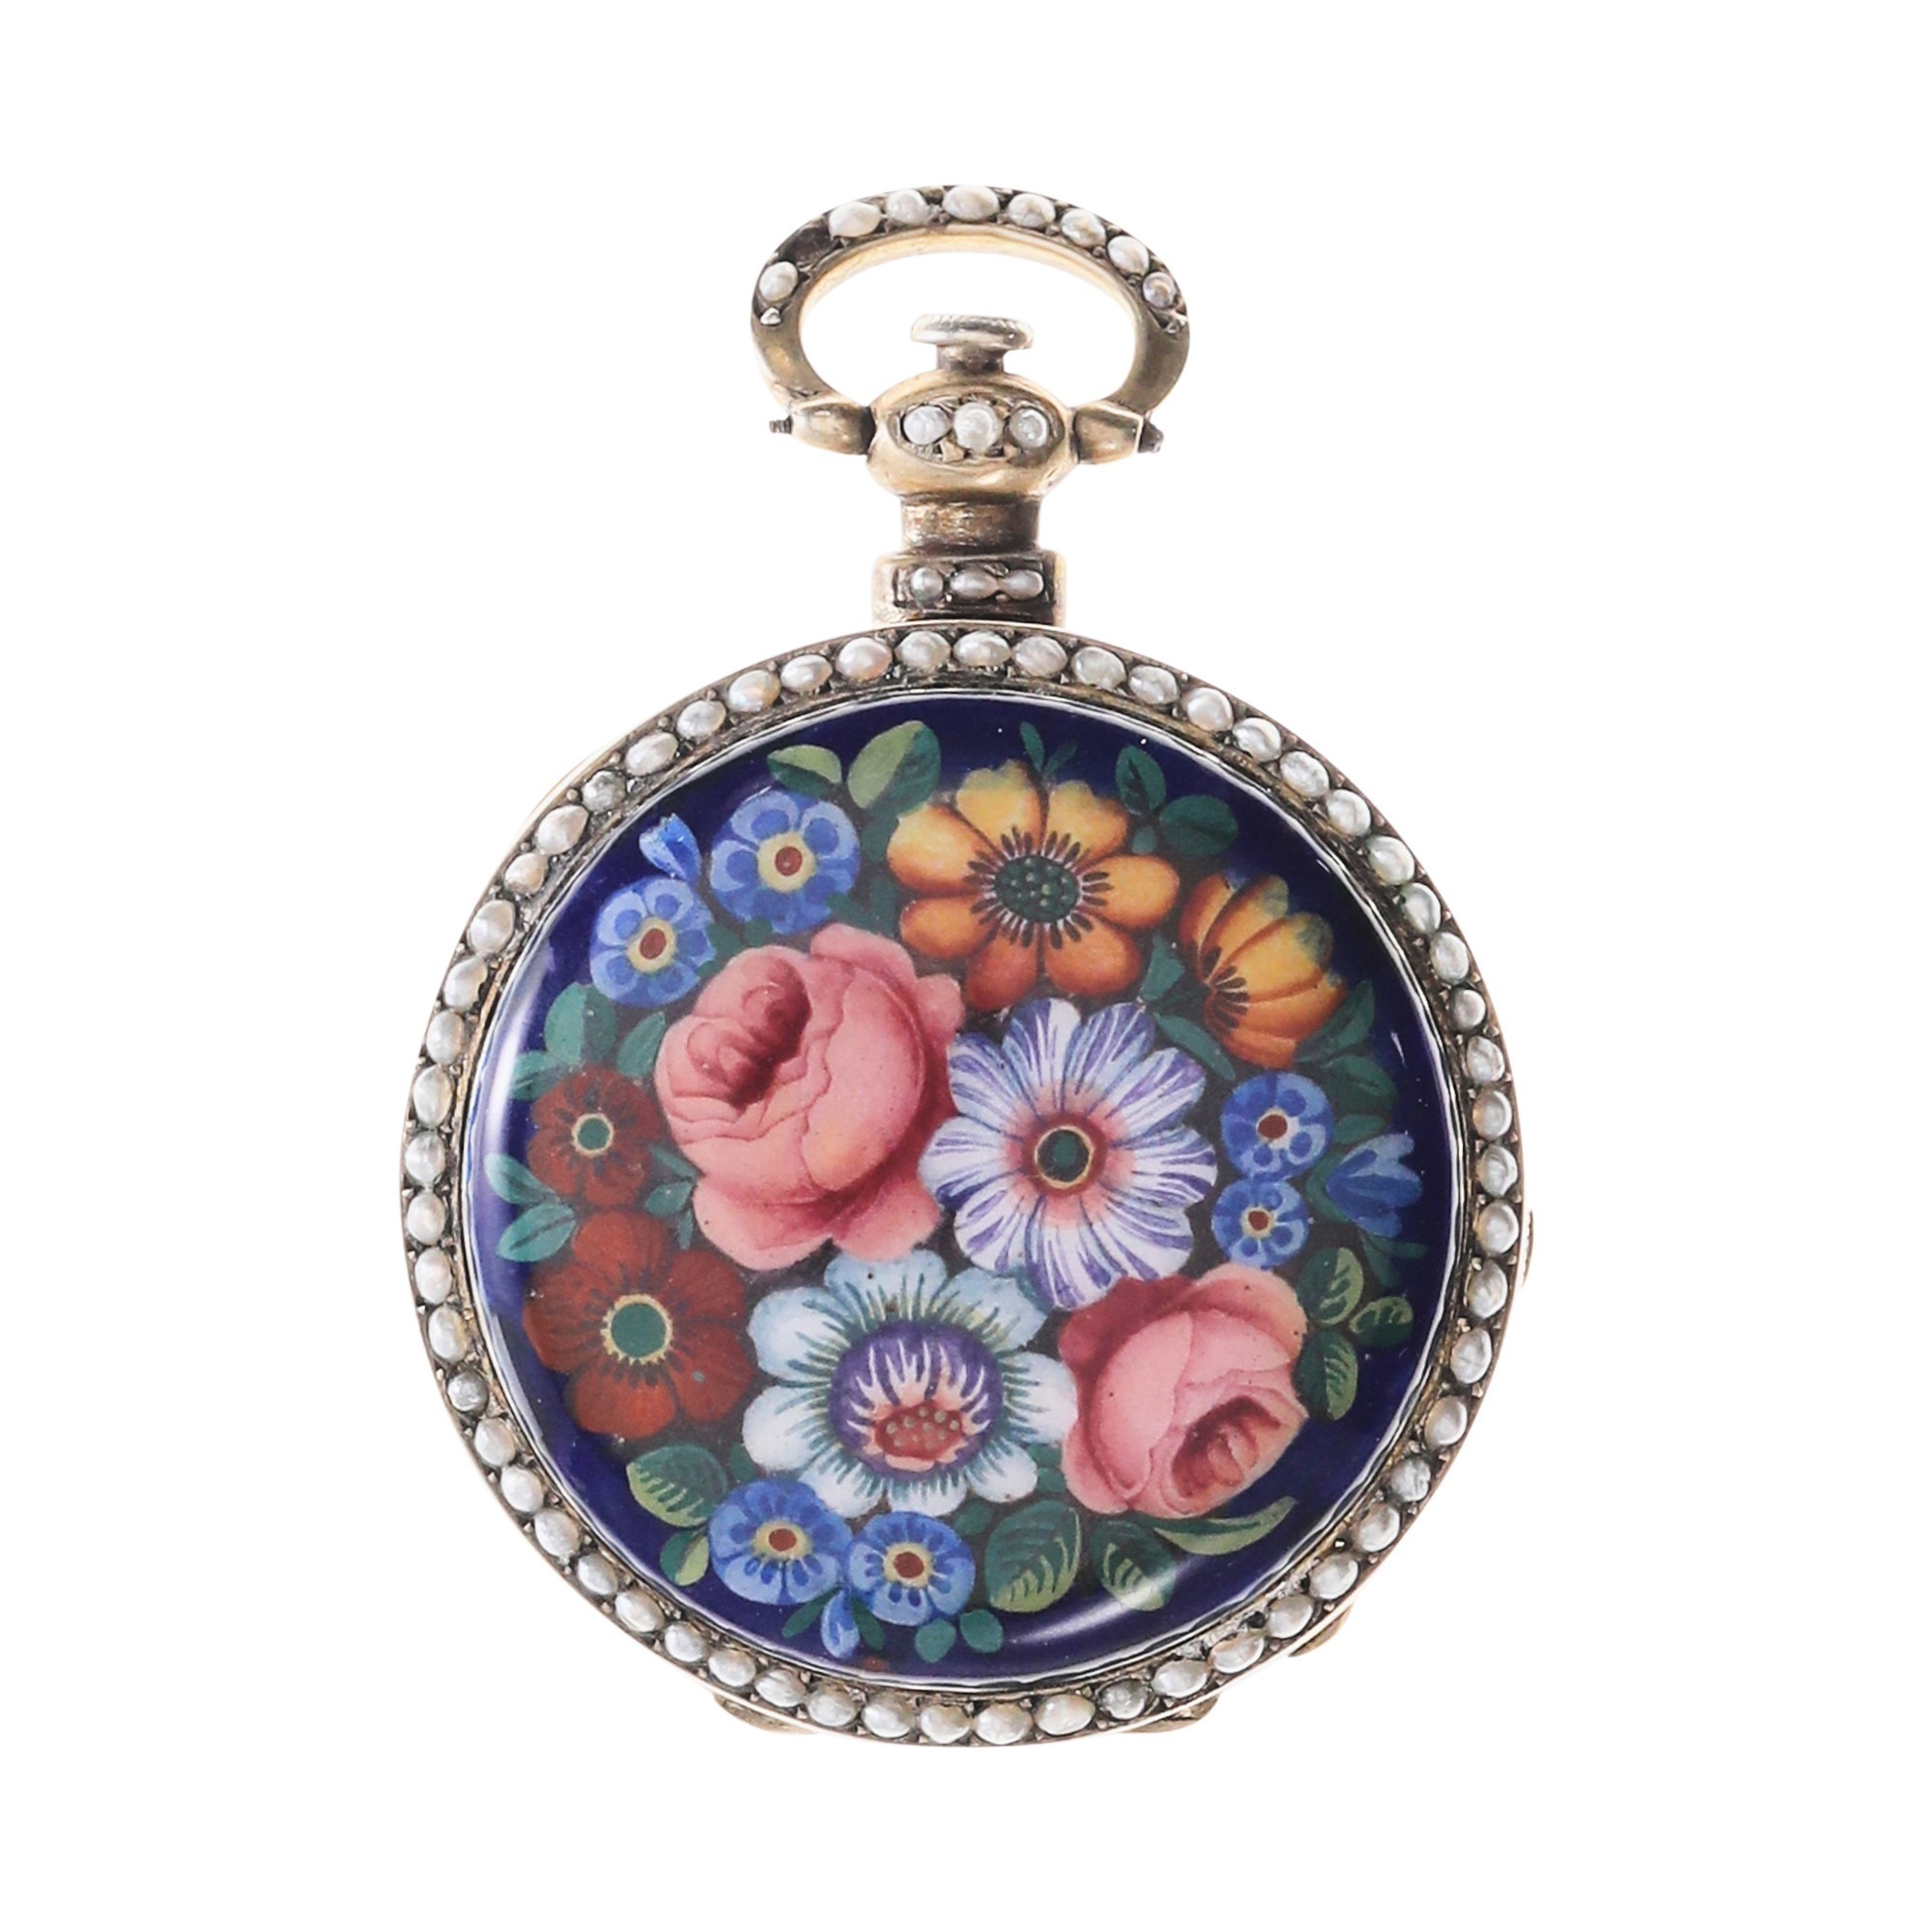 Swiss for Chinese Market Enamel and Seed Pearl Keywind Pendant Watch, Circa 1860